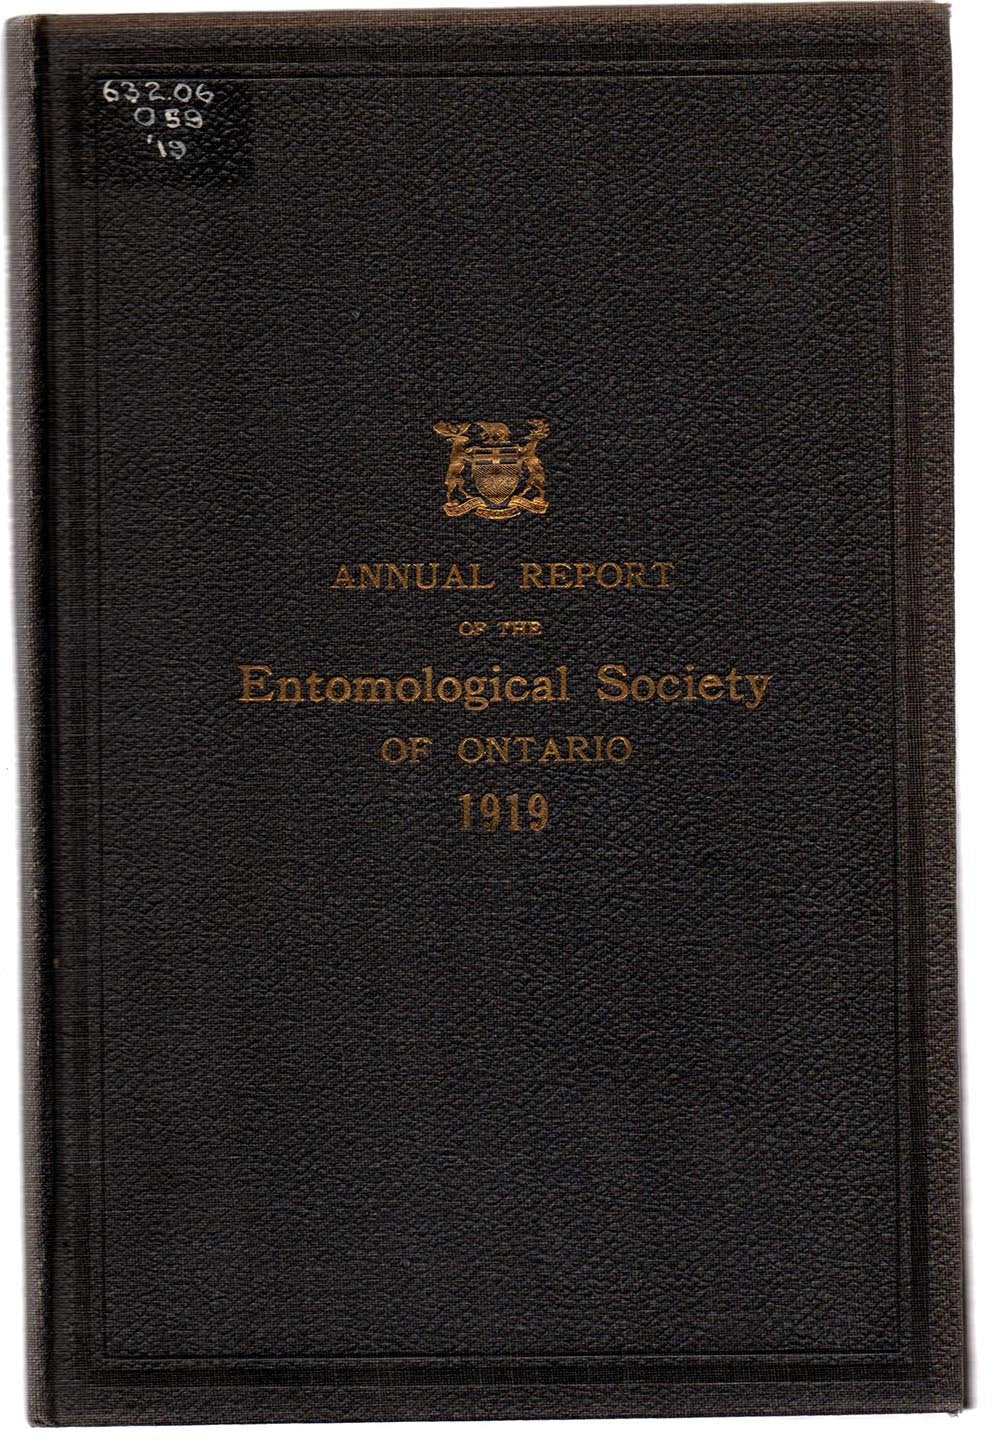 Fiftieth Annual Report of the Entomological Society of Ontario 1919